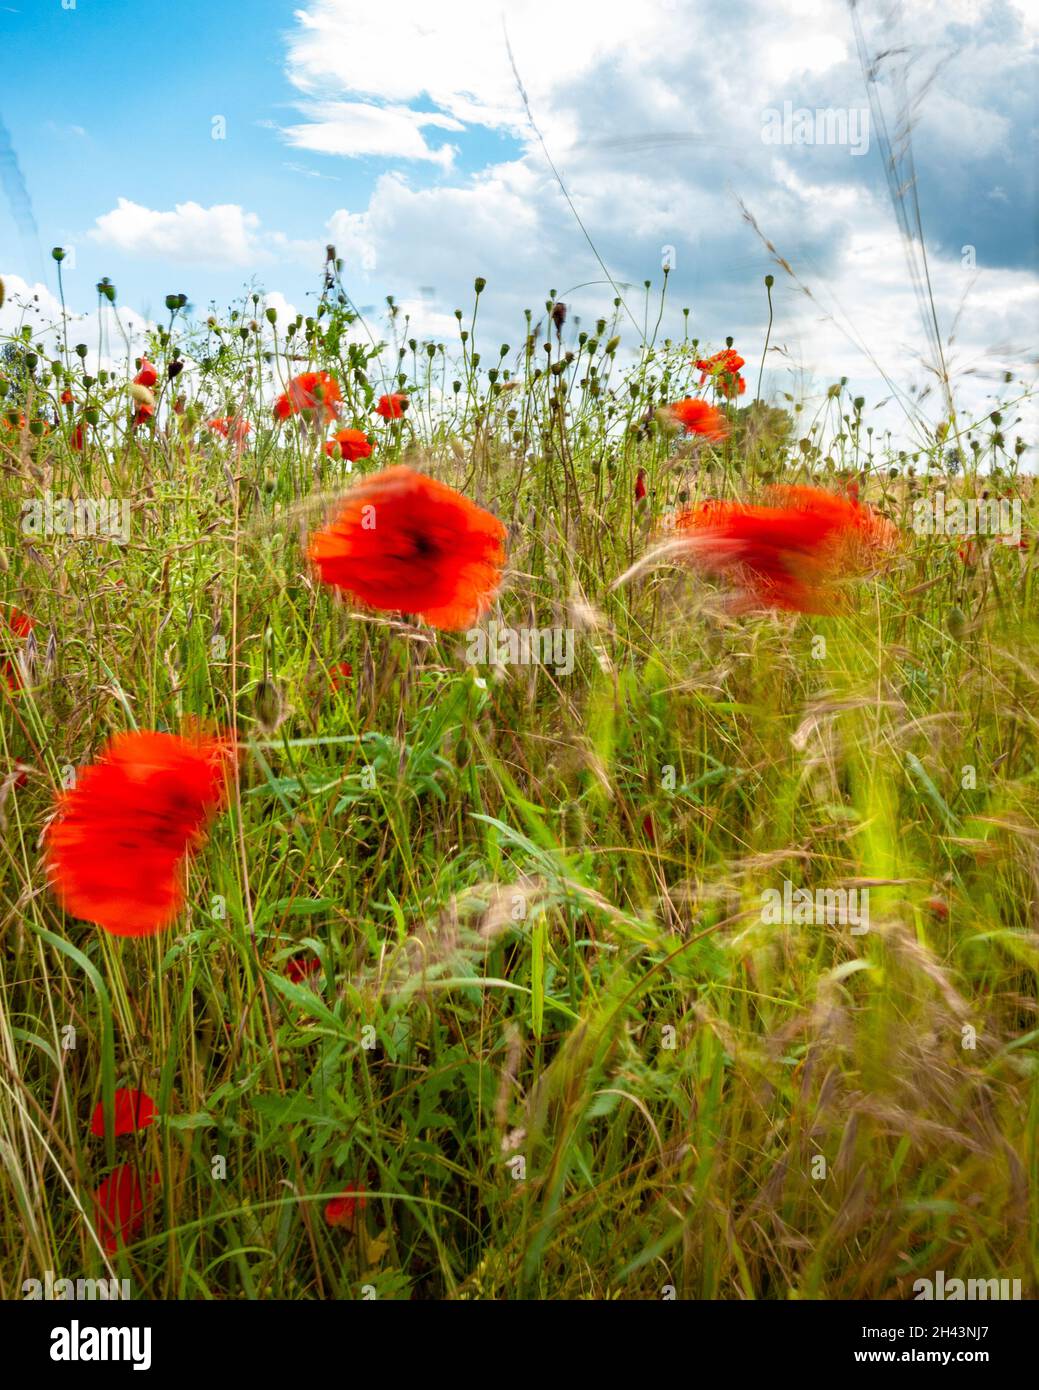 Red poppies gently swaying in the breeze amongst green herbaceous growth Stock Photo